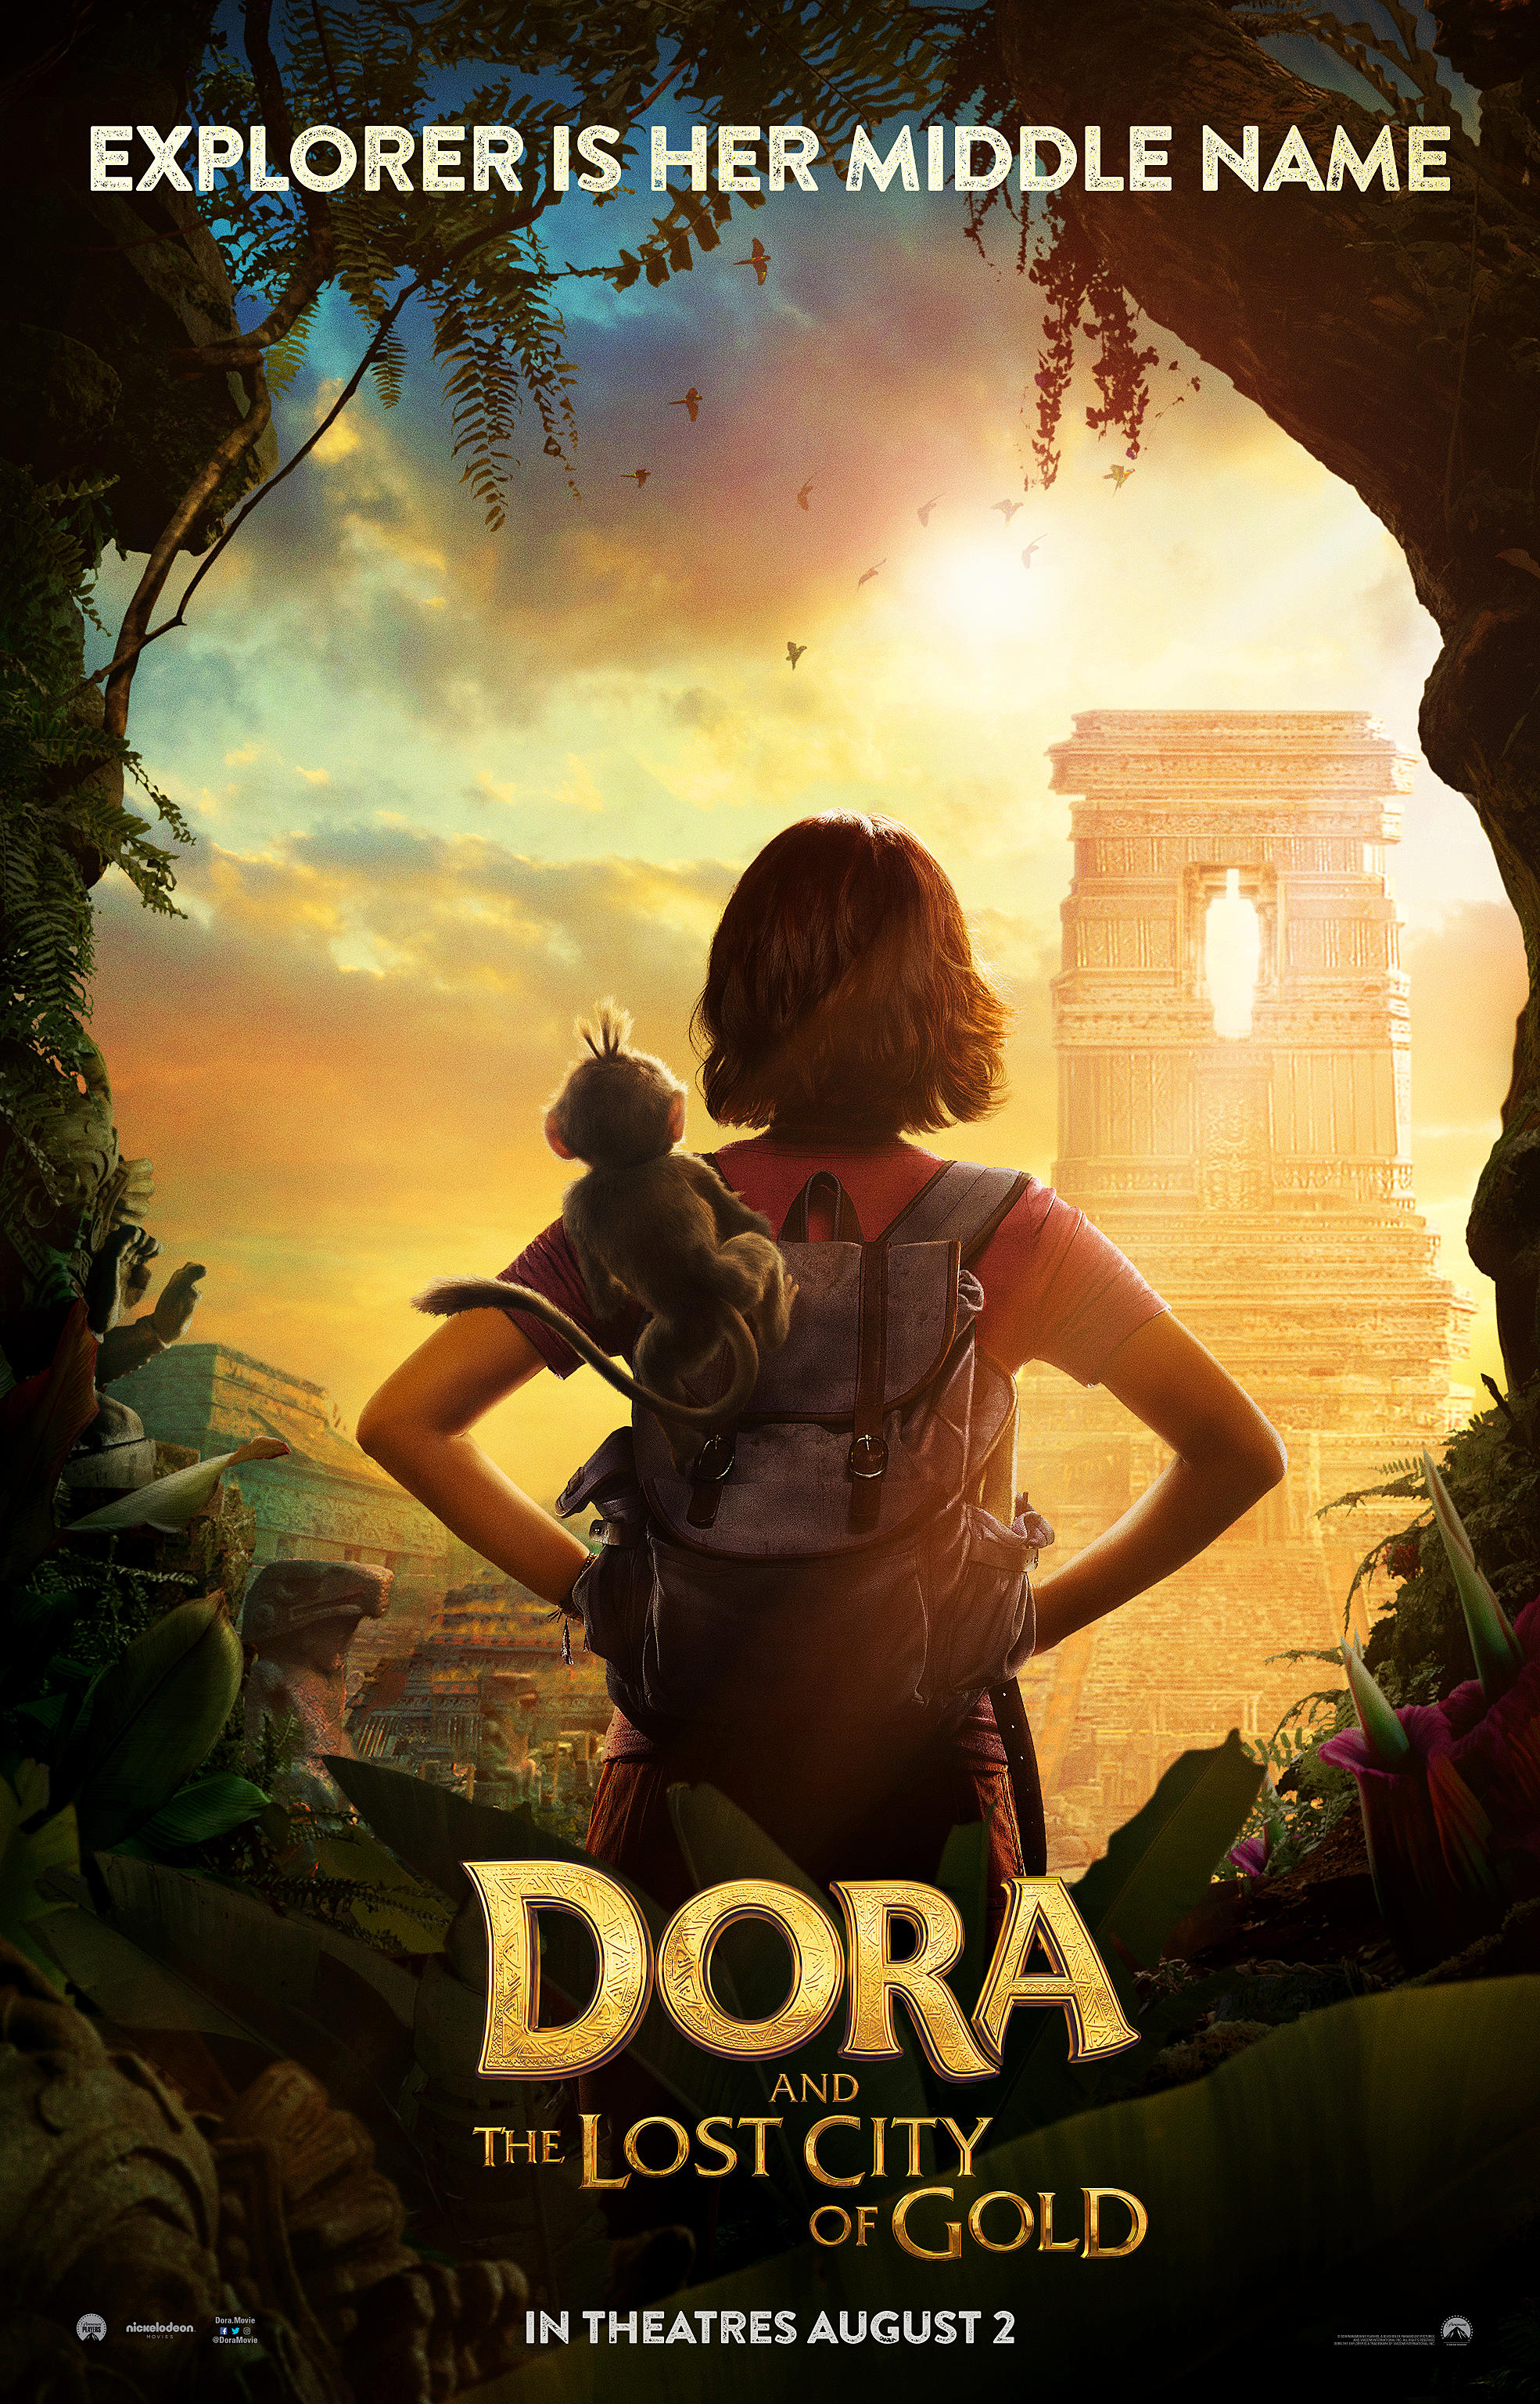 The Dora The Explorer Movie Has A Poster And An Official Title